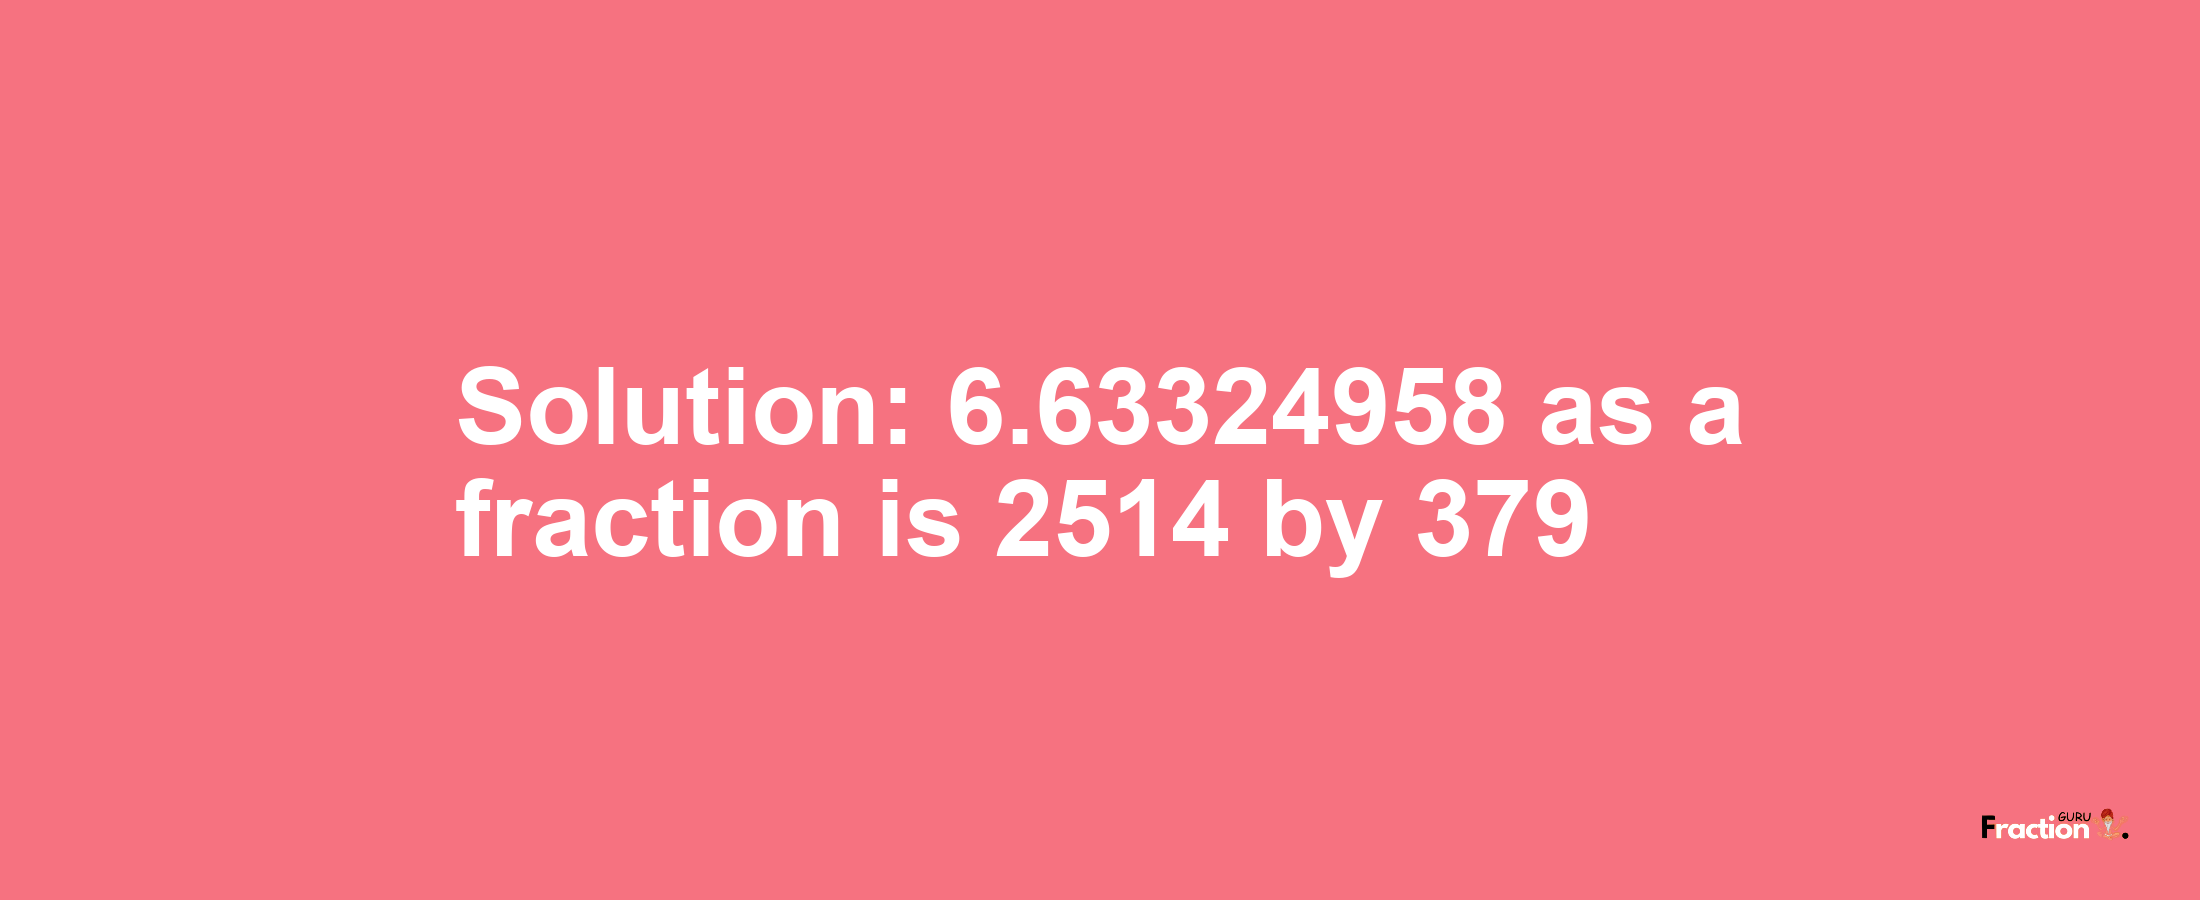 Solution:6.63324958 as a fraction is 2514/379